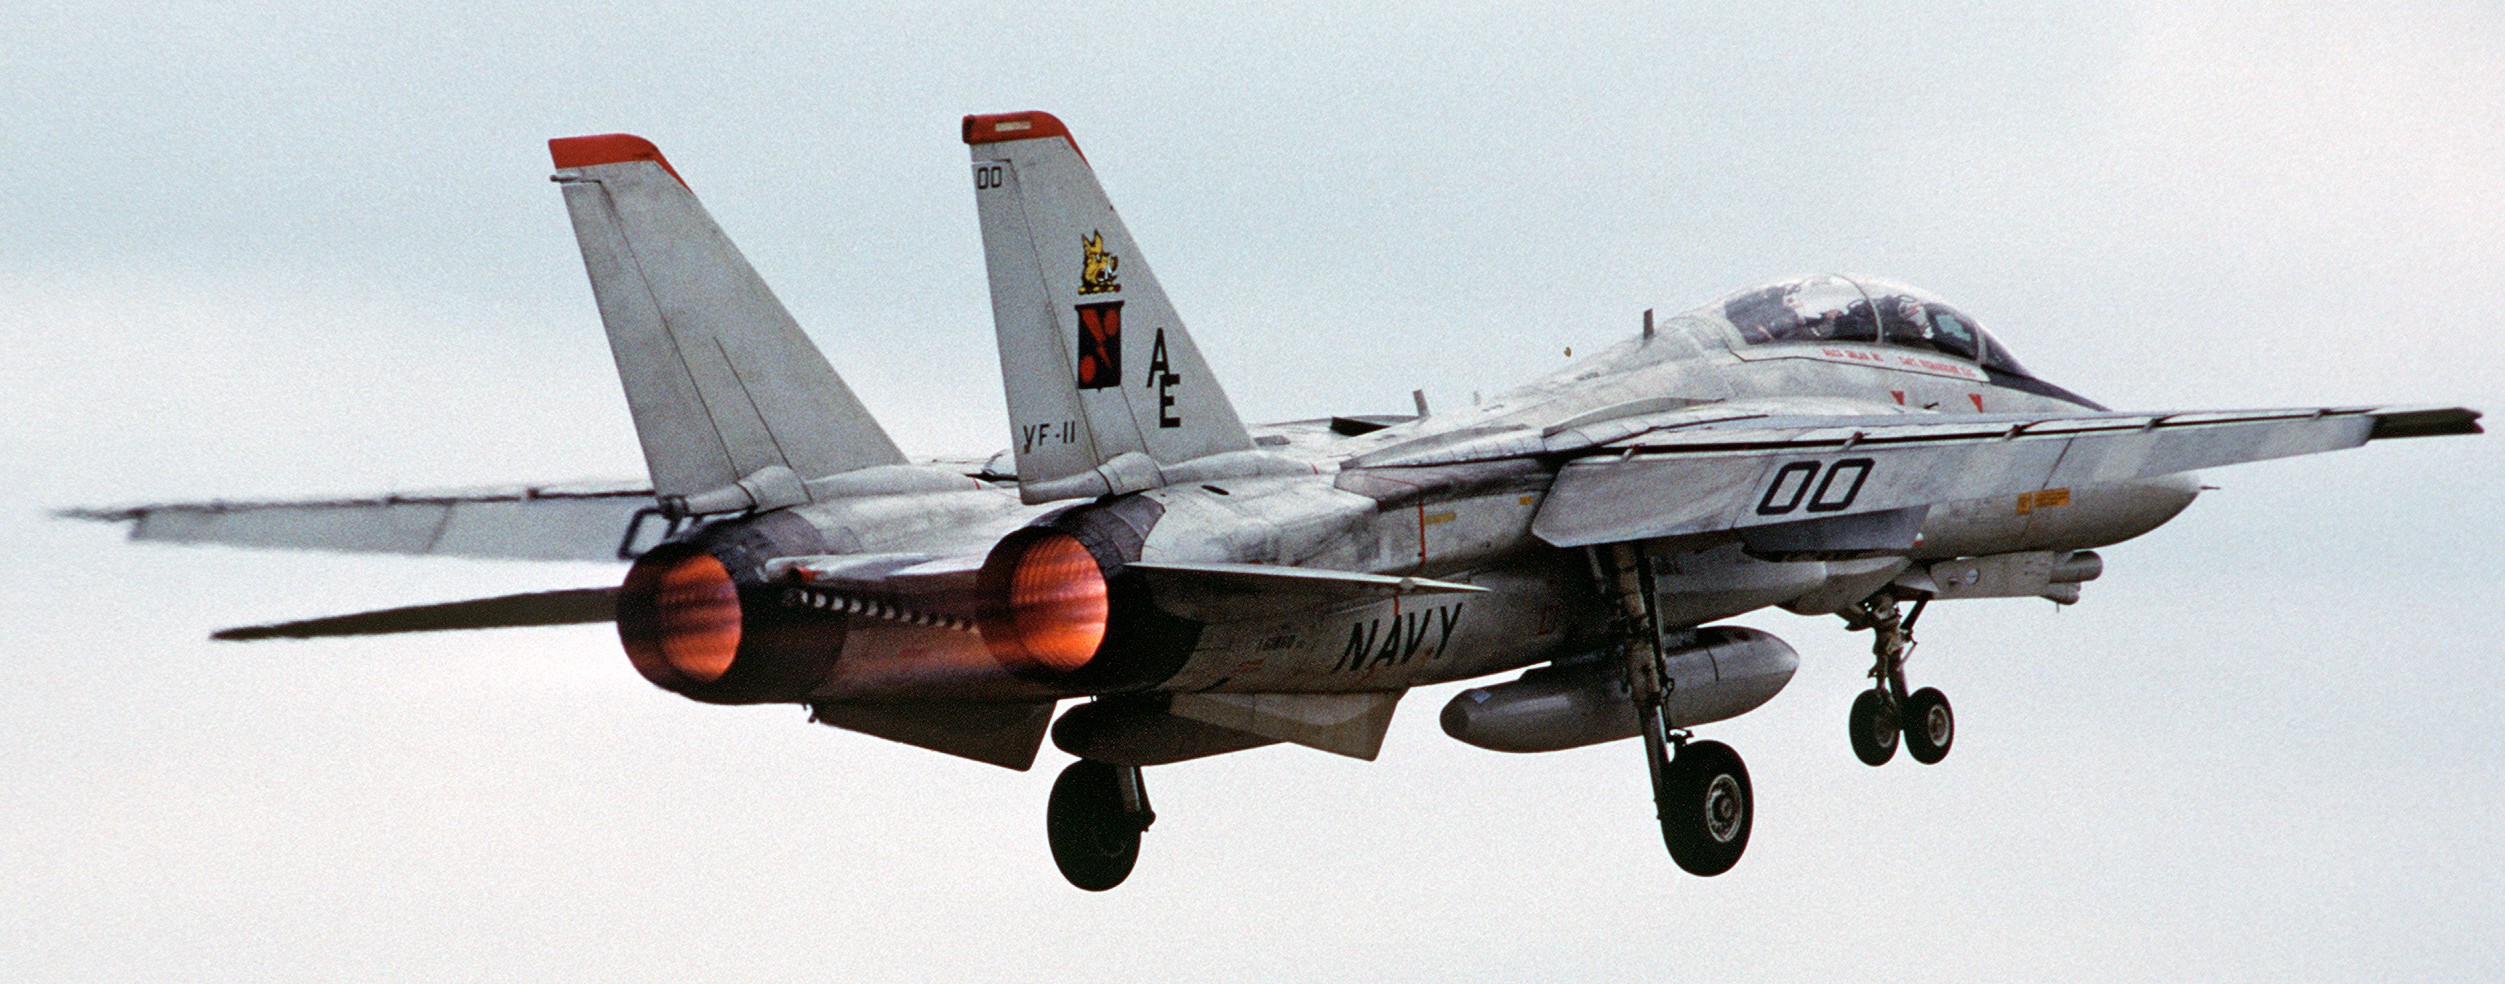 vf-11 red rippers fighter squadron us navy fitron f-14a tomcat carrier air wing cvw-6 uss forrestal cv-59 nas oceana 70